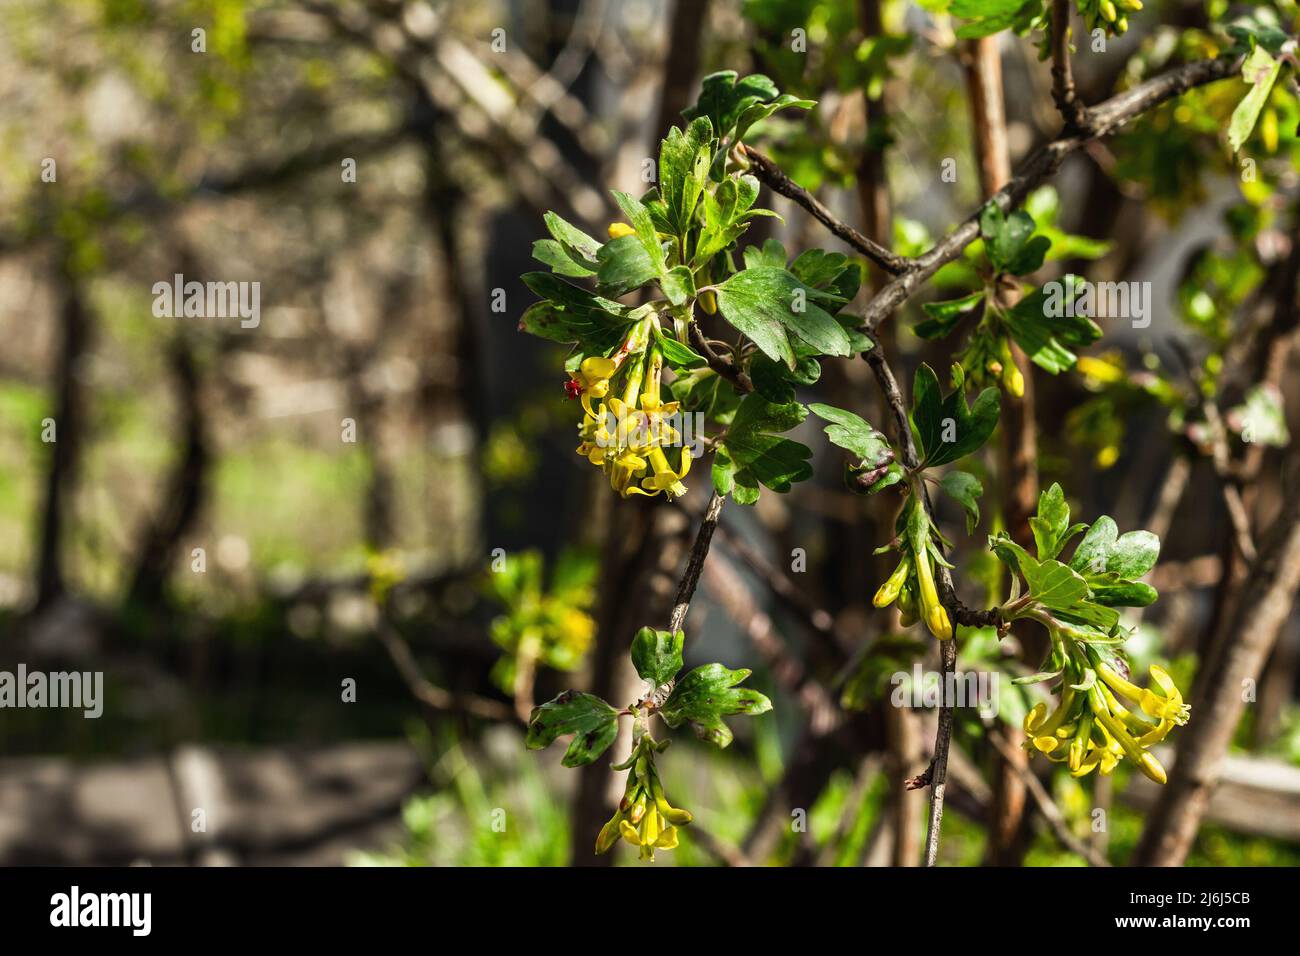 Blooming golden currant or Ribes aureum bush in the garden. Spring seasonal of growing plants. Gardening concept background Stock Photo